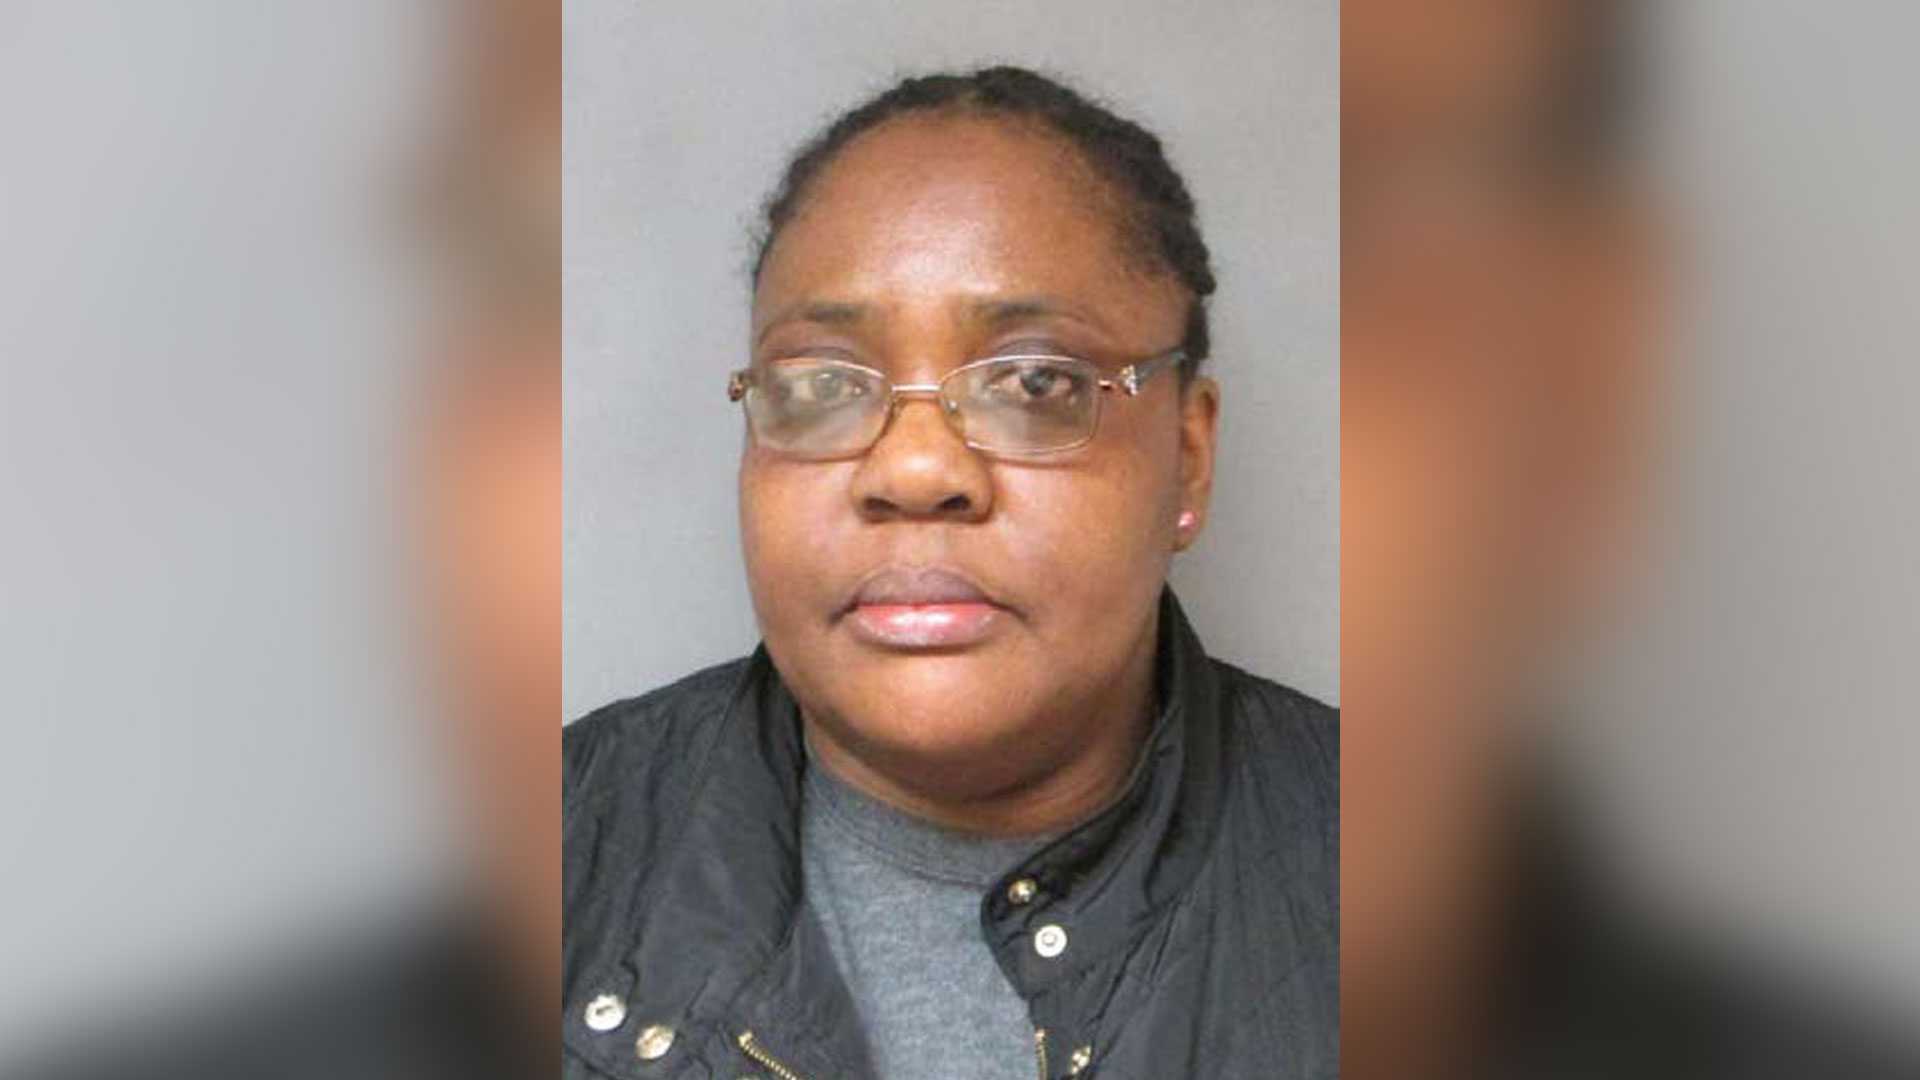 Caregiver accused of trying to suffocate 88-year-old woman